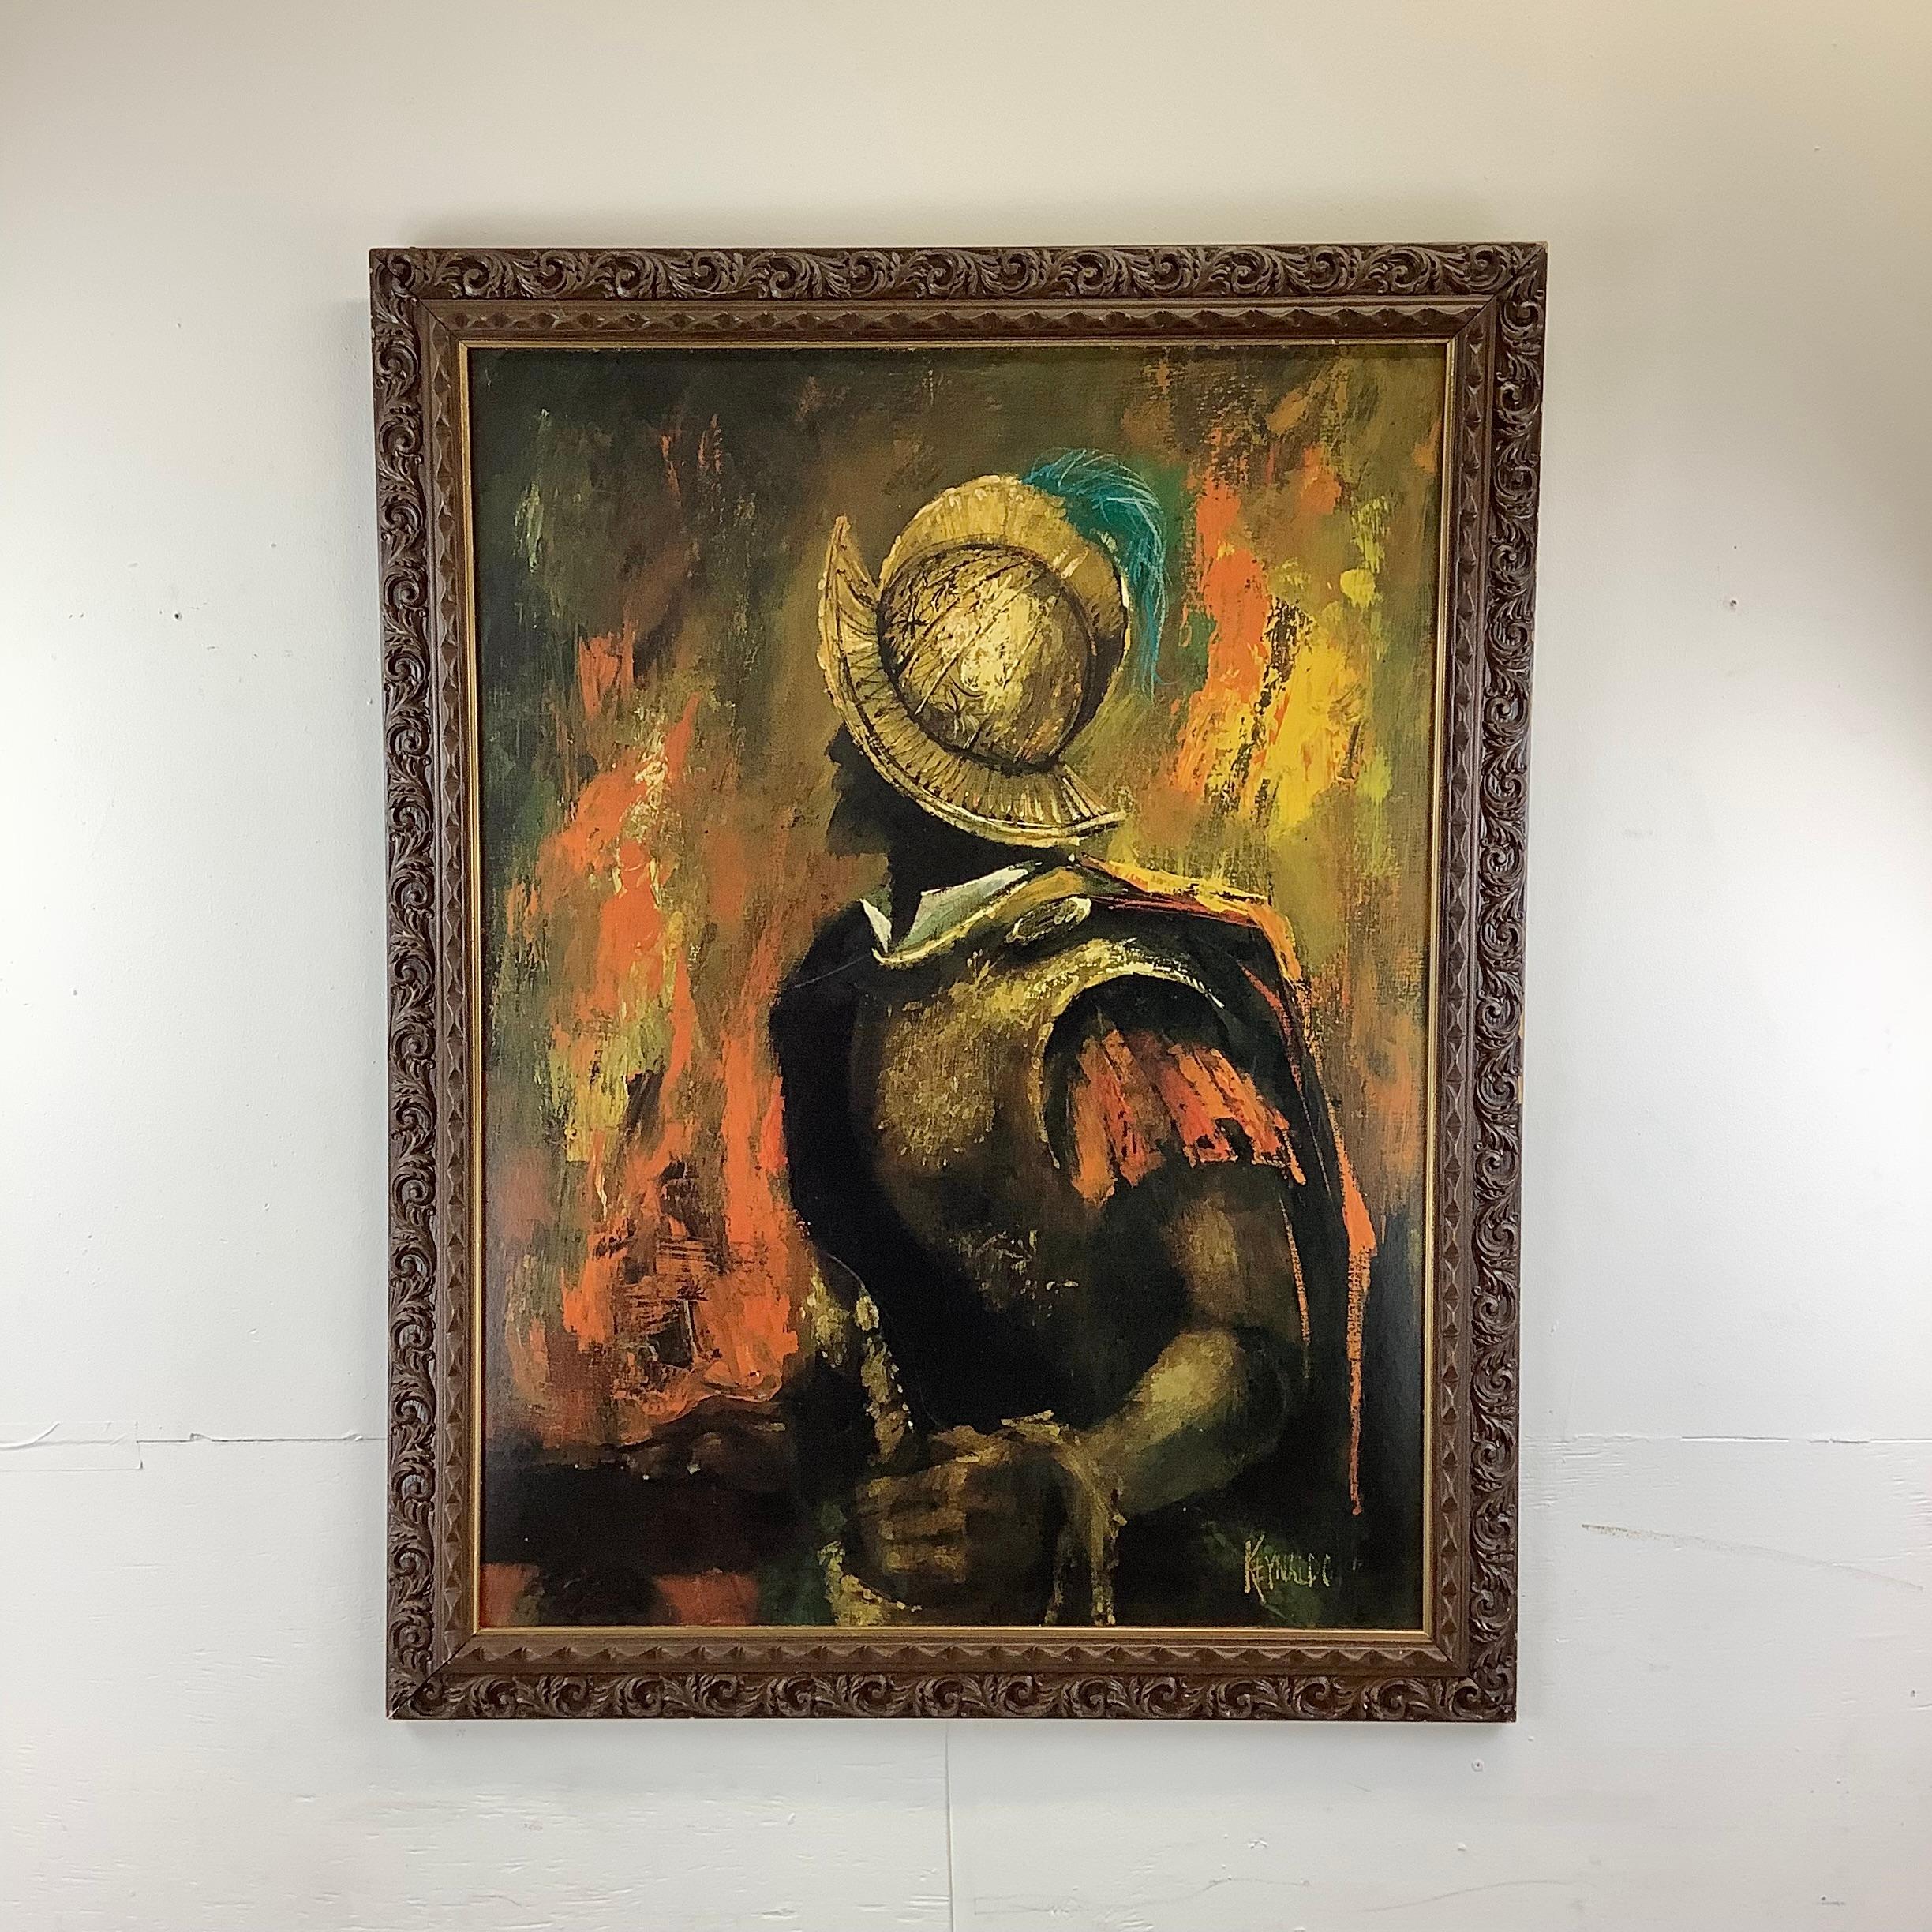 This impressive vintage largescale art print depicts the profile of a Spanish Conquistador in perfect mid-century color palette and set in a textured wood frame. This print on board art piece shows the signature of the original artist, 